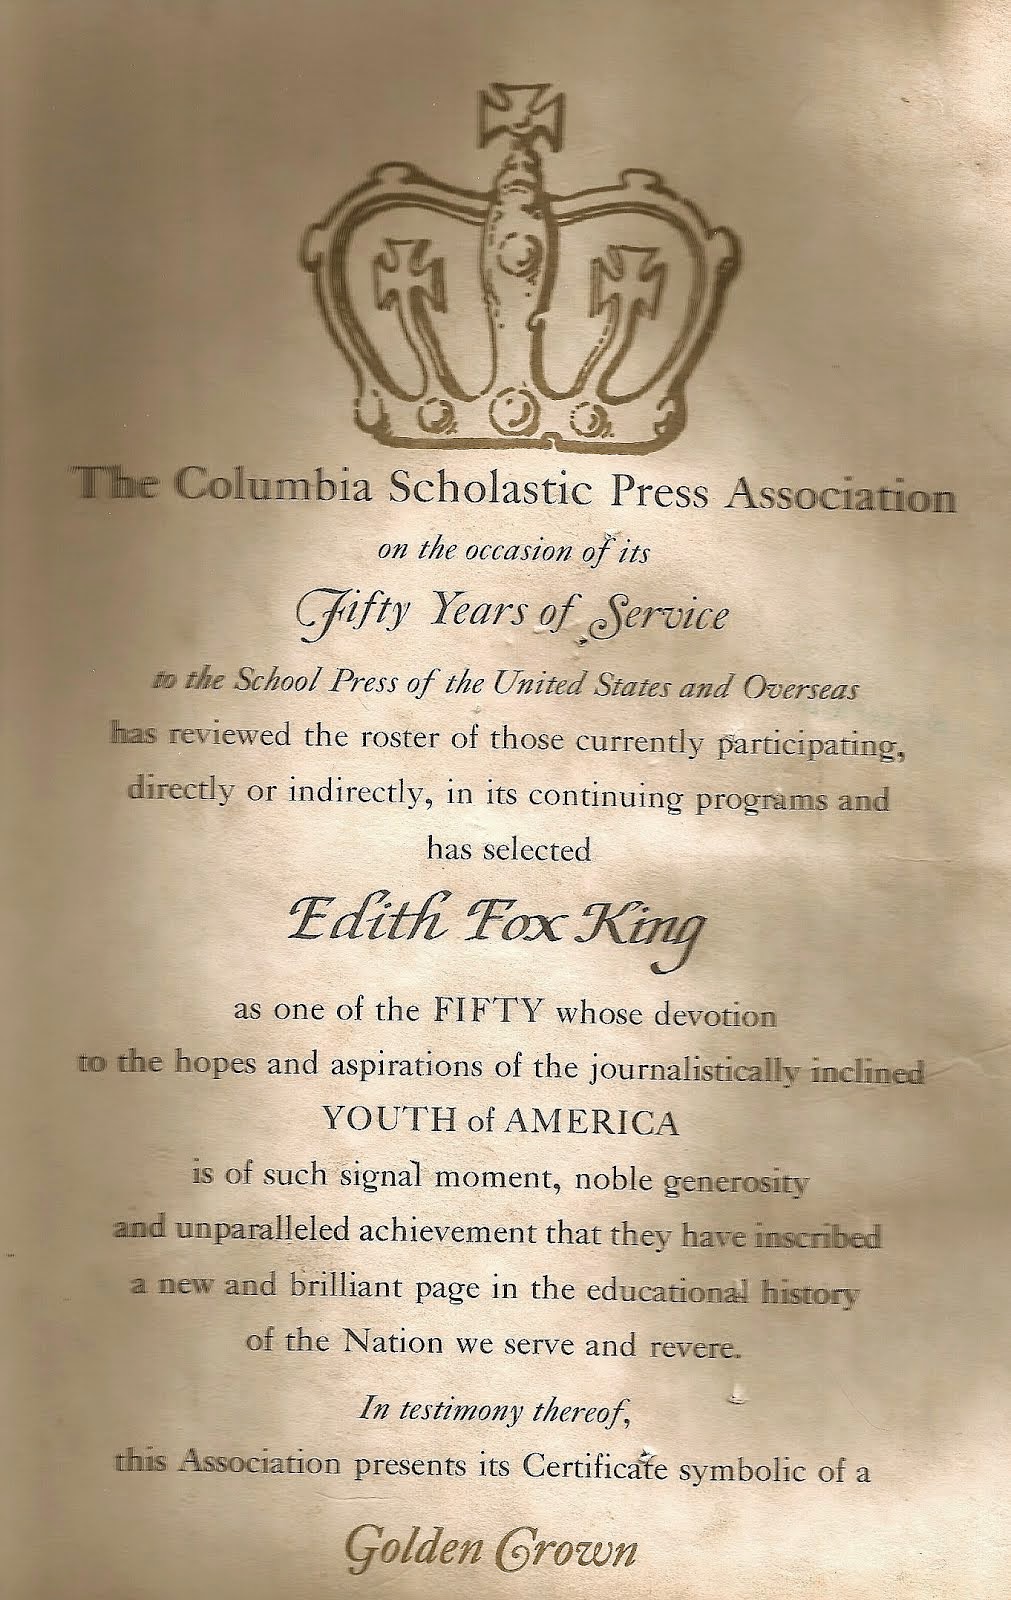 An award from Columbia Scholastic Press Association in 1955